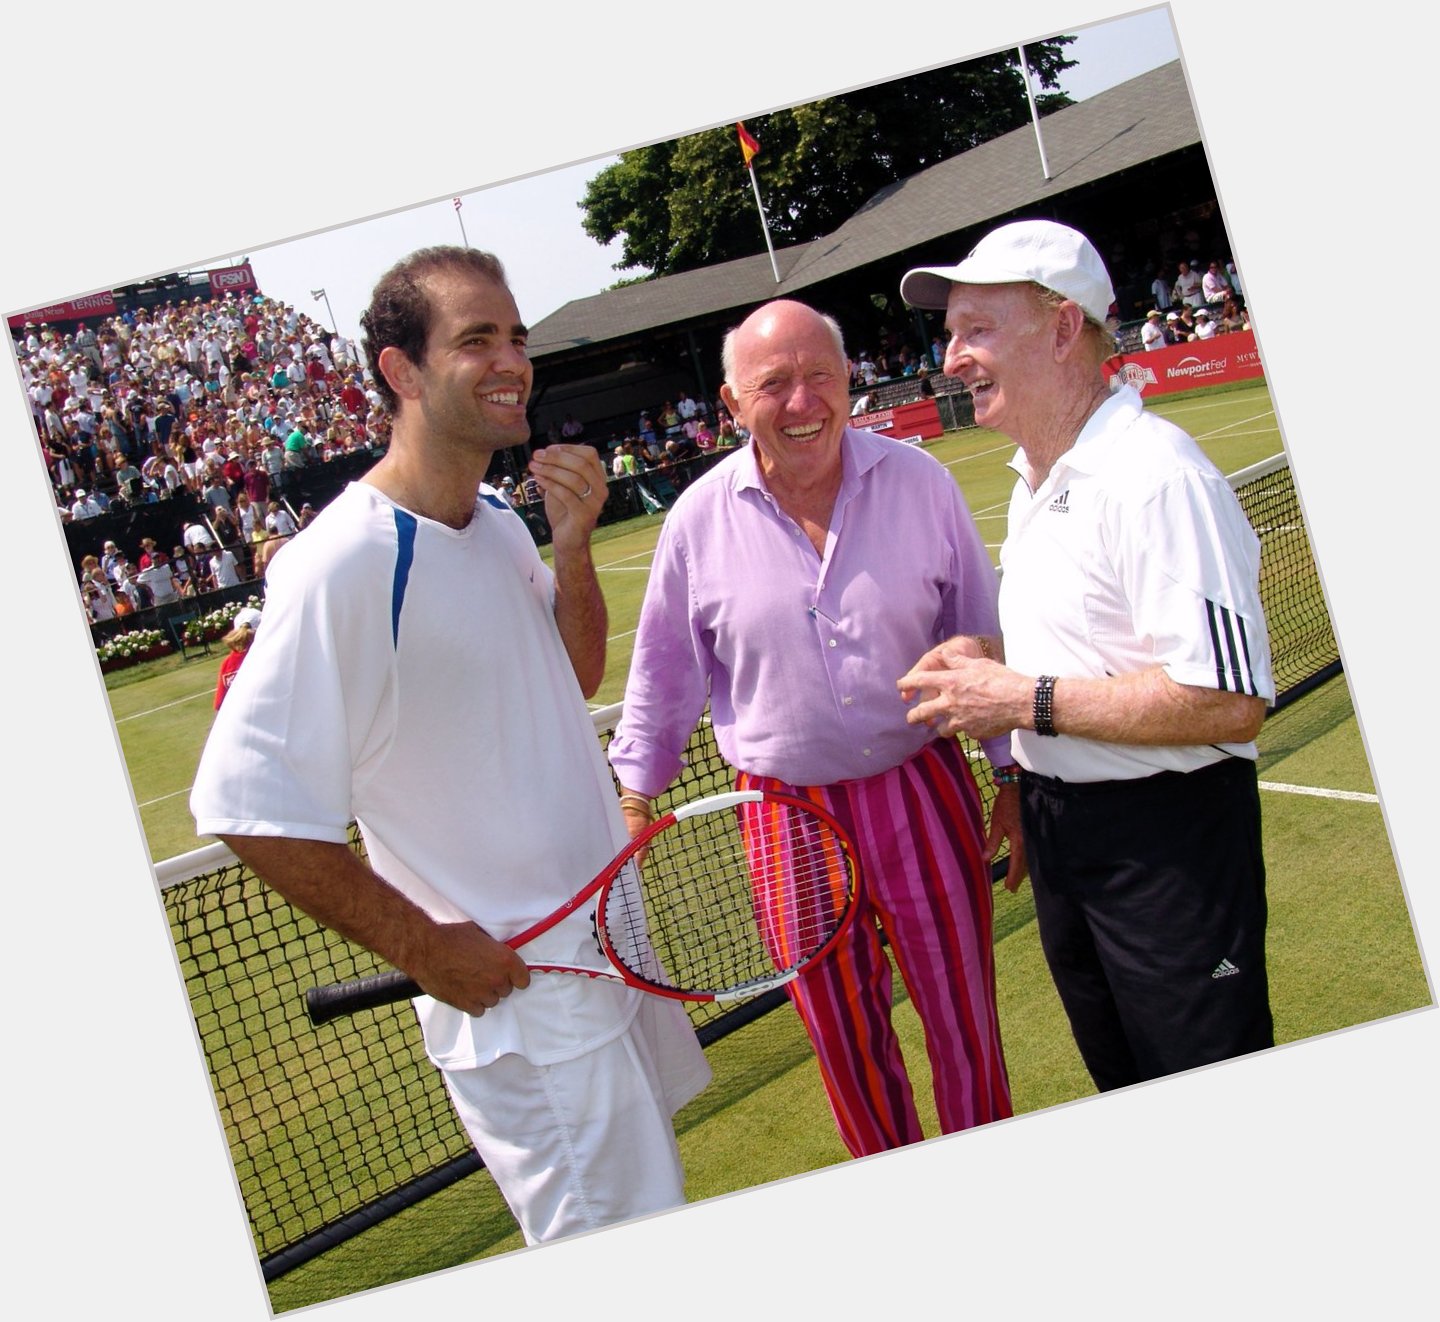 Happy birthday today to Pete Sampras (seen here with Bud Collins and Rod Laver!) 